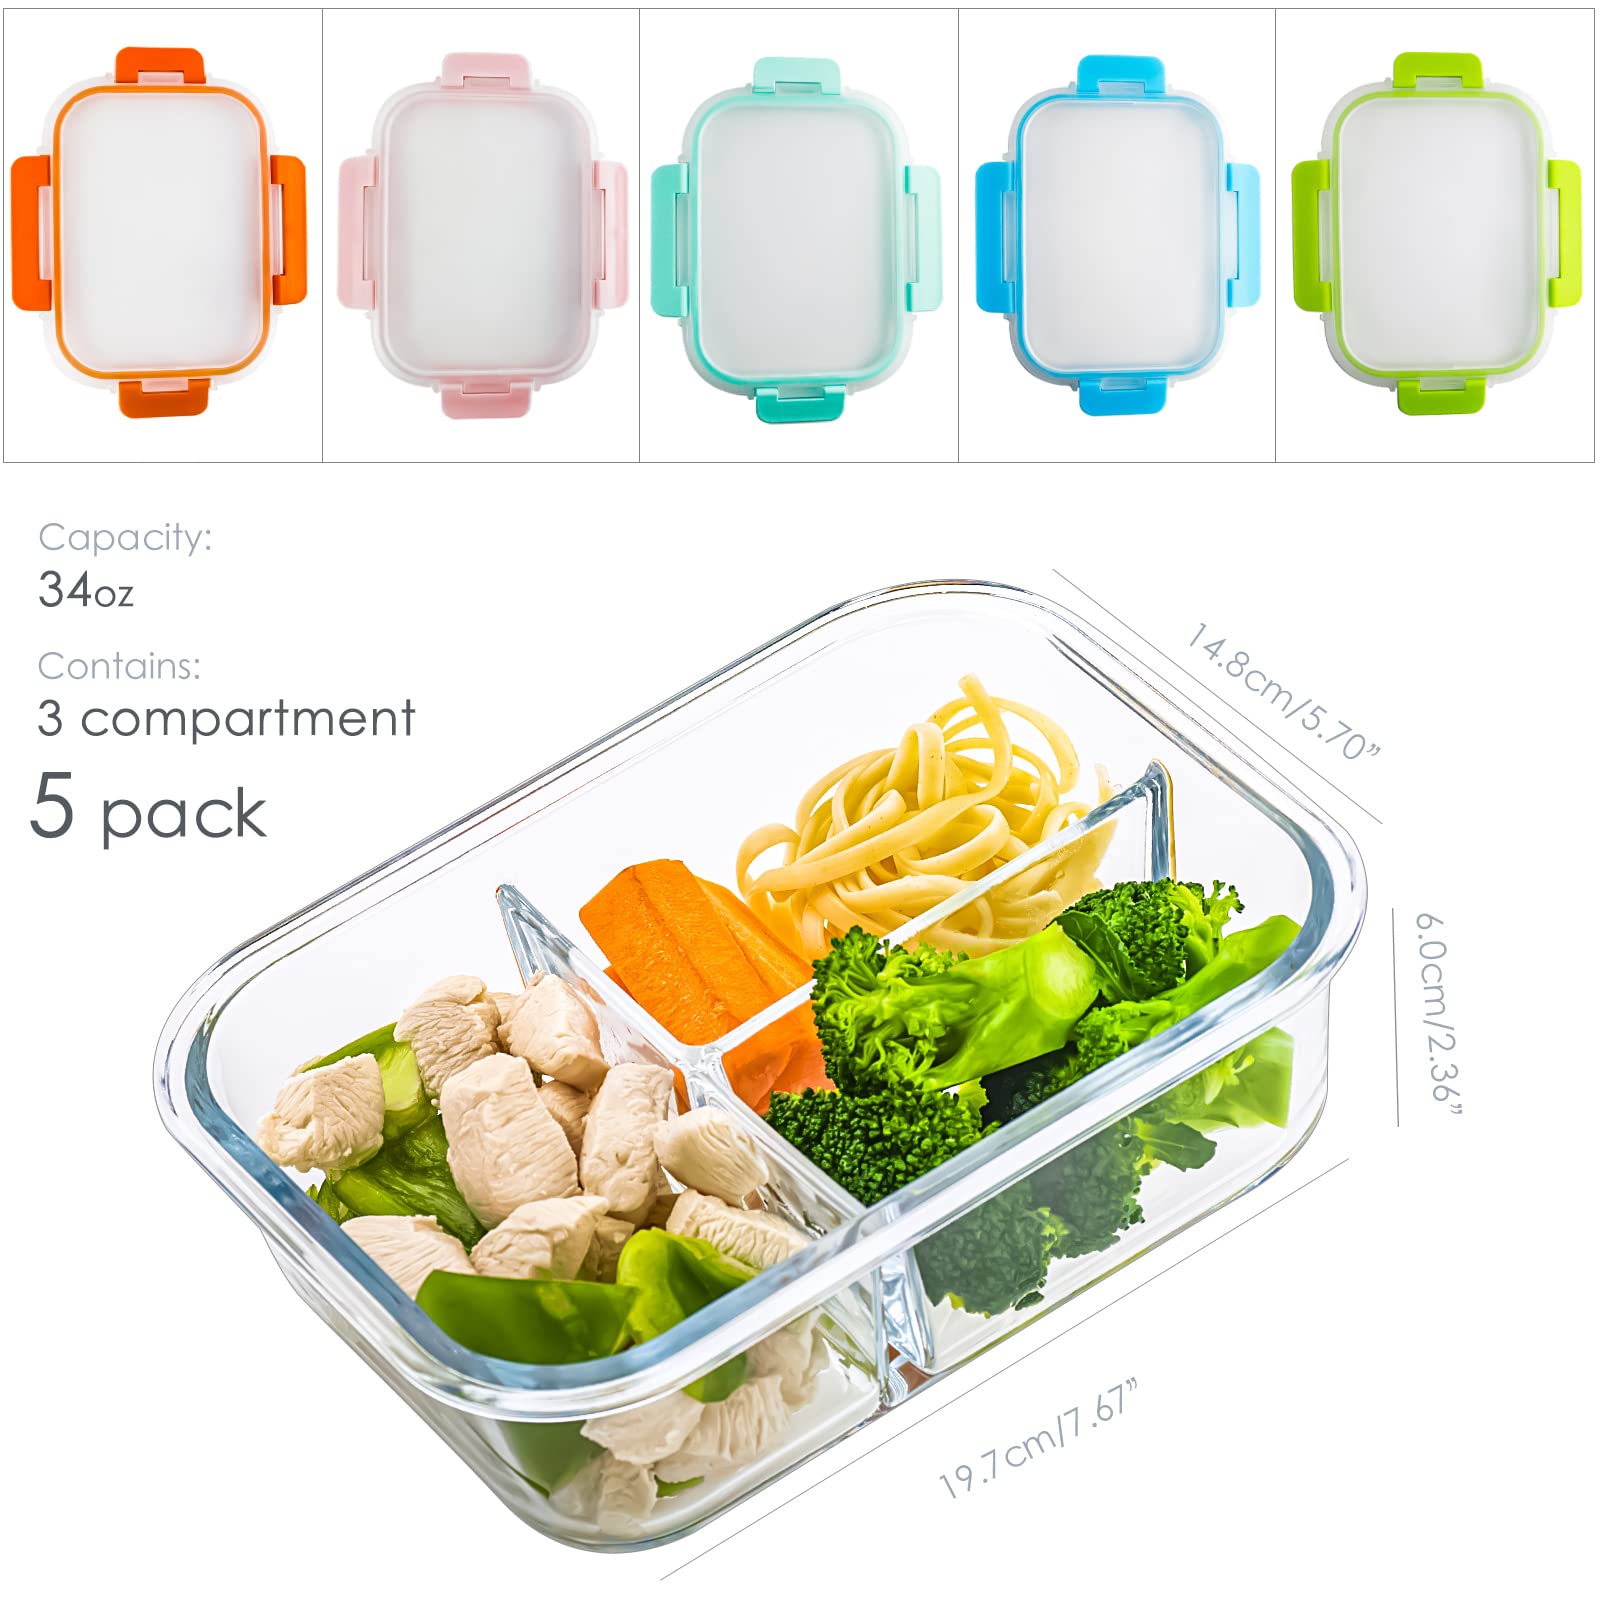 UMEIED Glass Meal Prep Containers 3 Compartment with Lids (5 Pack, 36oz), Divided Glass Storage Containers for Lunch at Work, Leak-Proof Portion Control Food Containers, Microwave/Dishwasher Safe